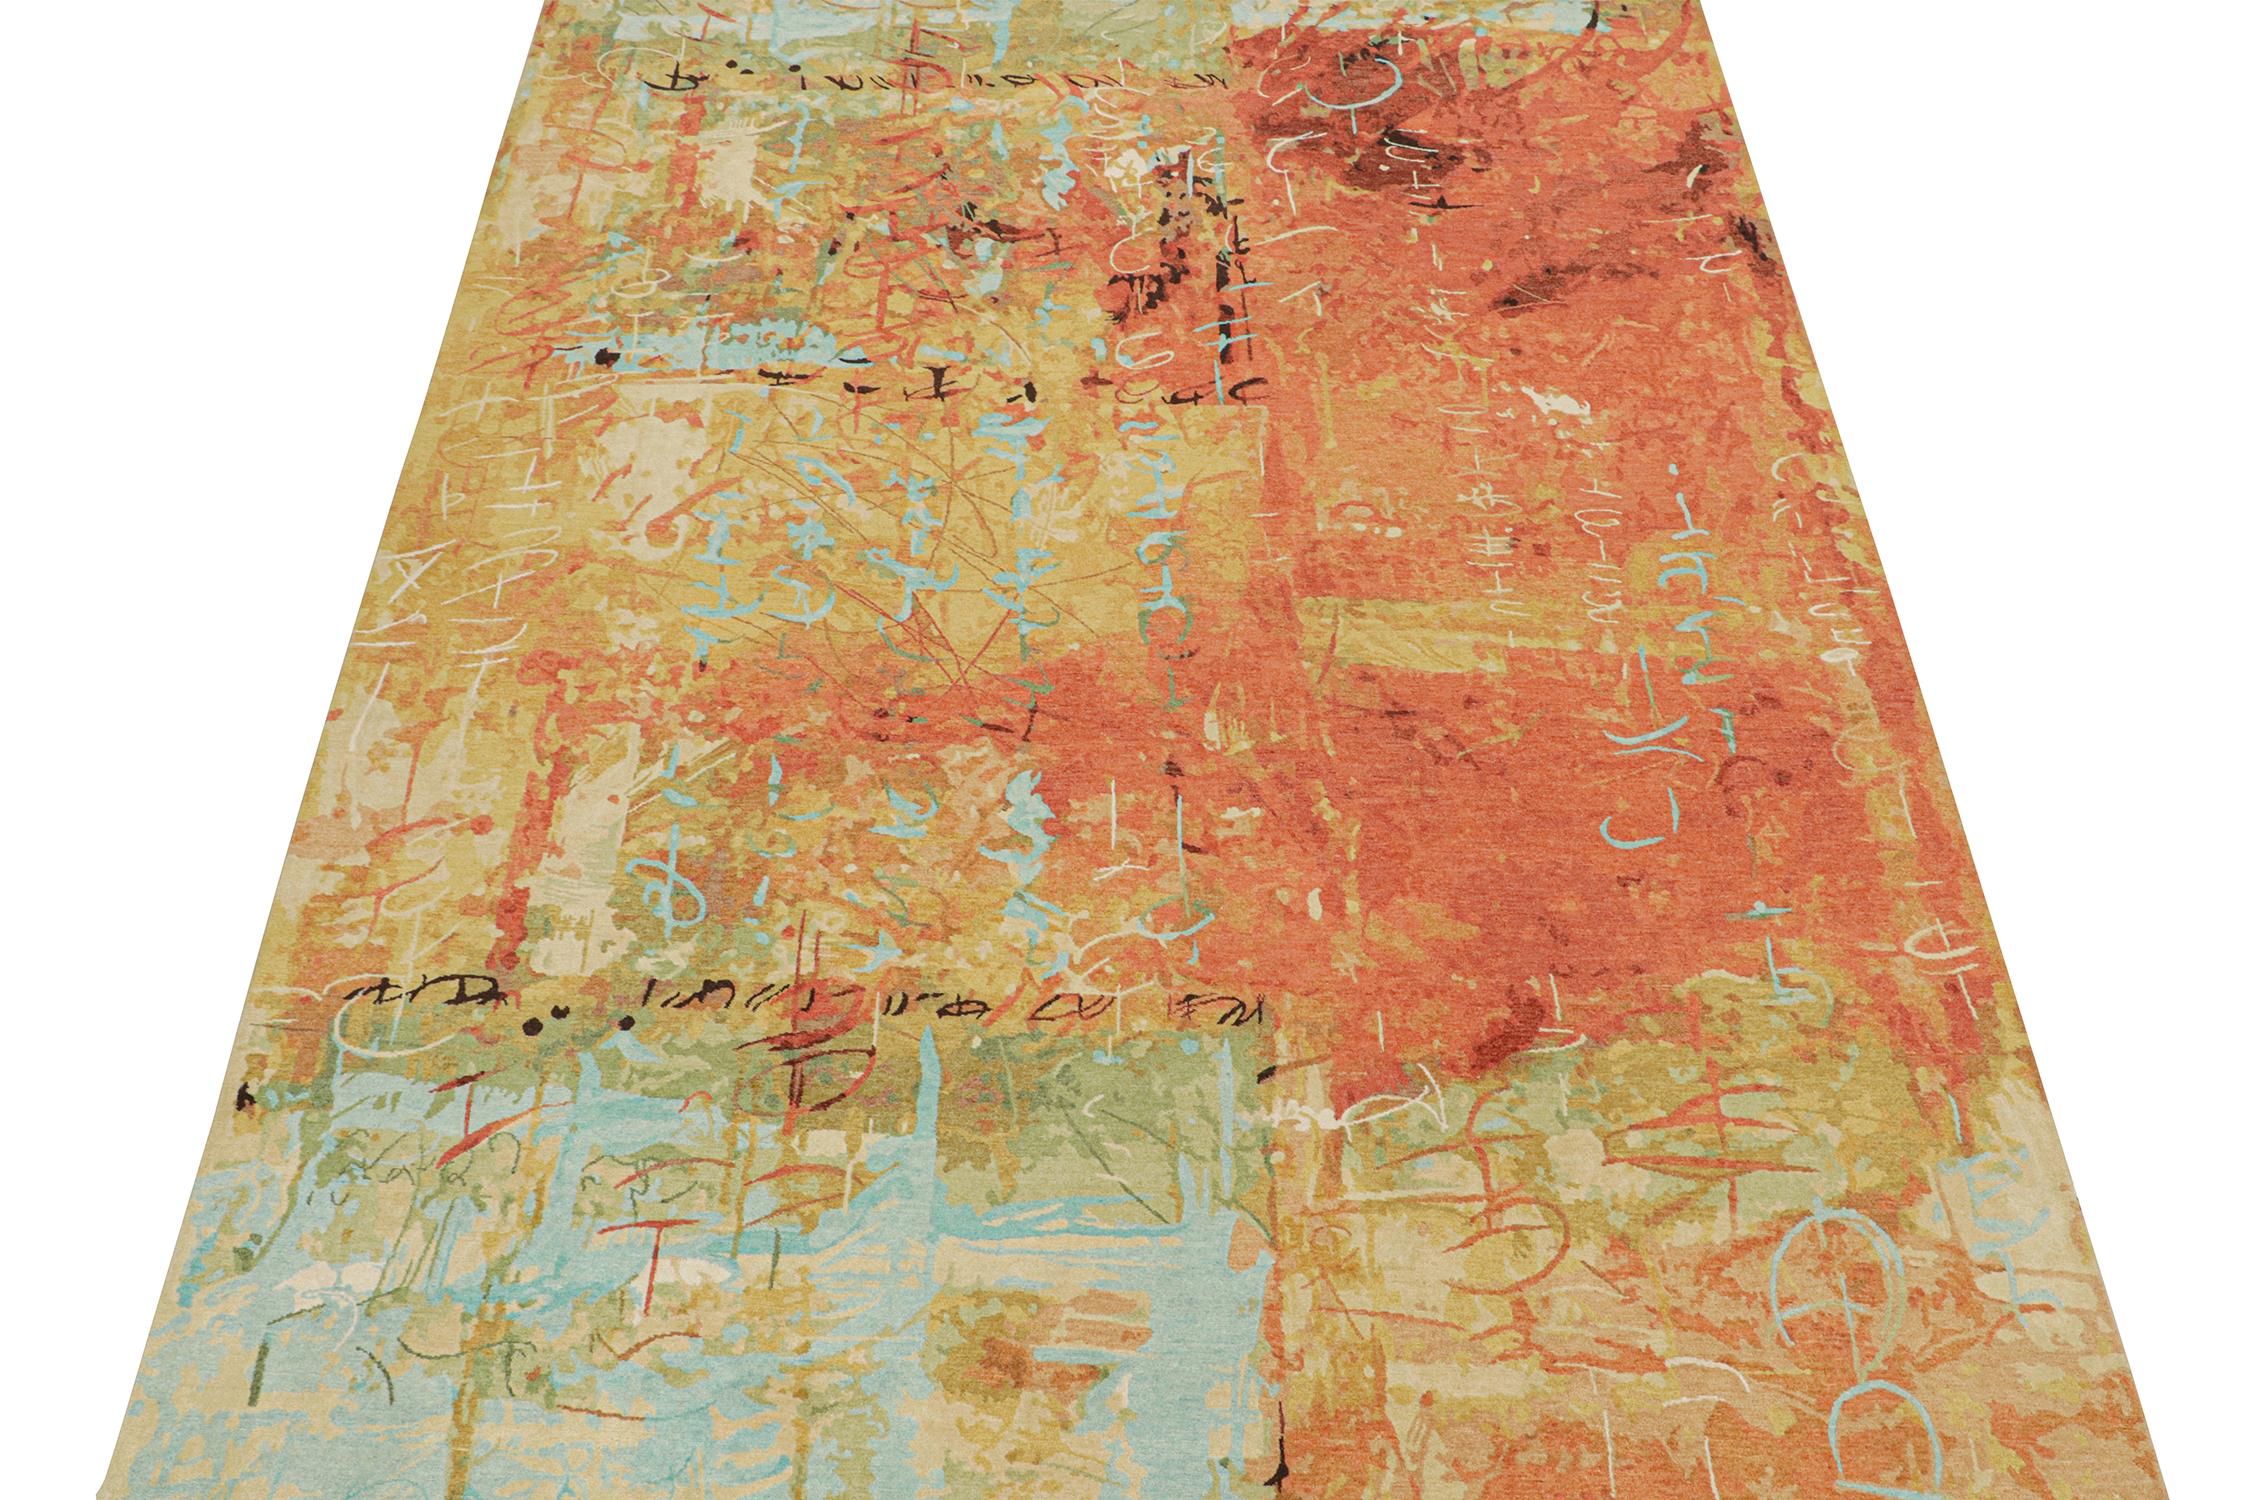 This 9x12 abstract rug is a bold new addition to Rug & Kilim’s Modern rug collection. Hand-knotted in wool and silk, its design is a take on expressionist sensibilities in the most exceptional high-end quality.

Further on the Design:

This art rug